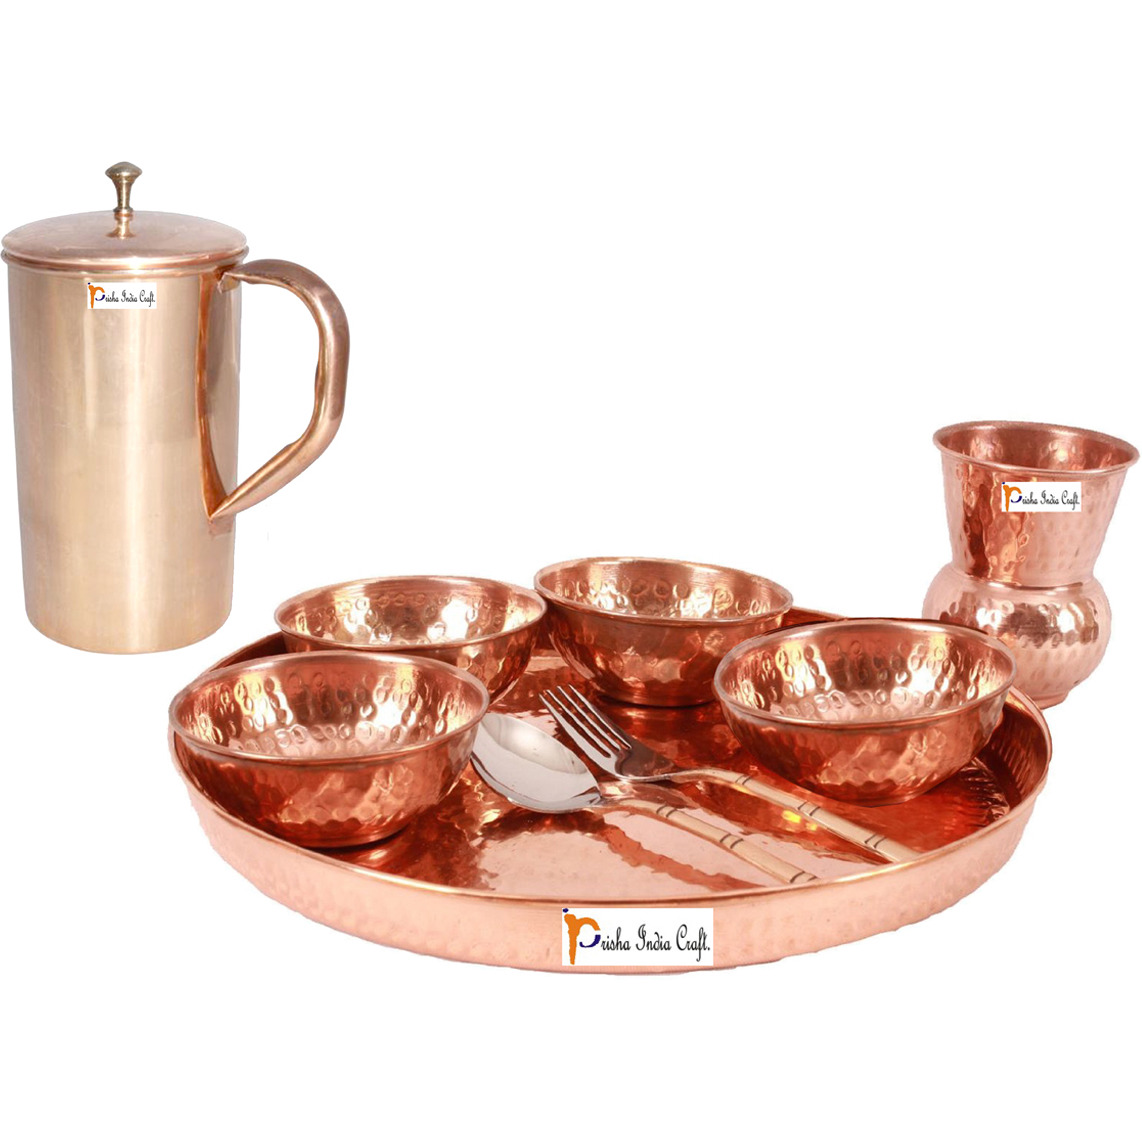 Prisha India Craft B. Dinnerware Traditional 100% Pure Copper Dinner Set of Thali Plate, Bowls, Glass and Spoon, Dia 12  With 1 Pure Copper Classic Pitcher Jug - Christmas Gift